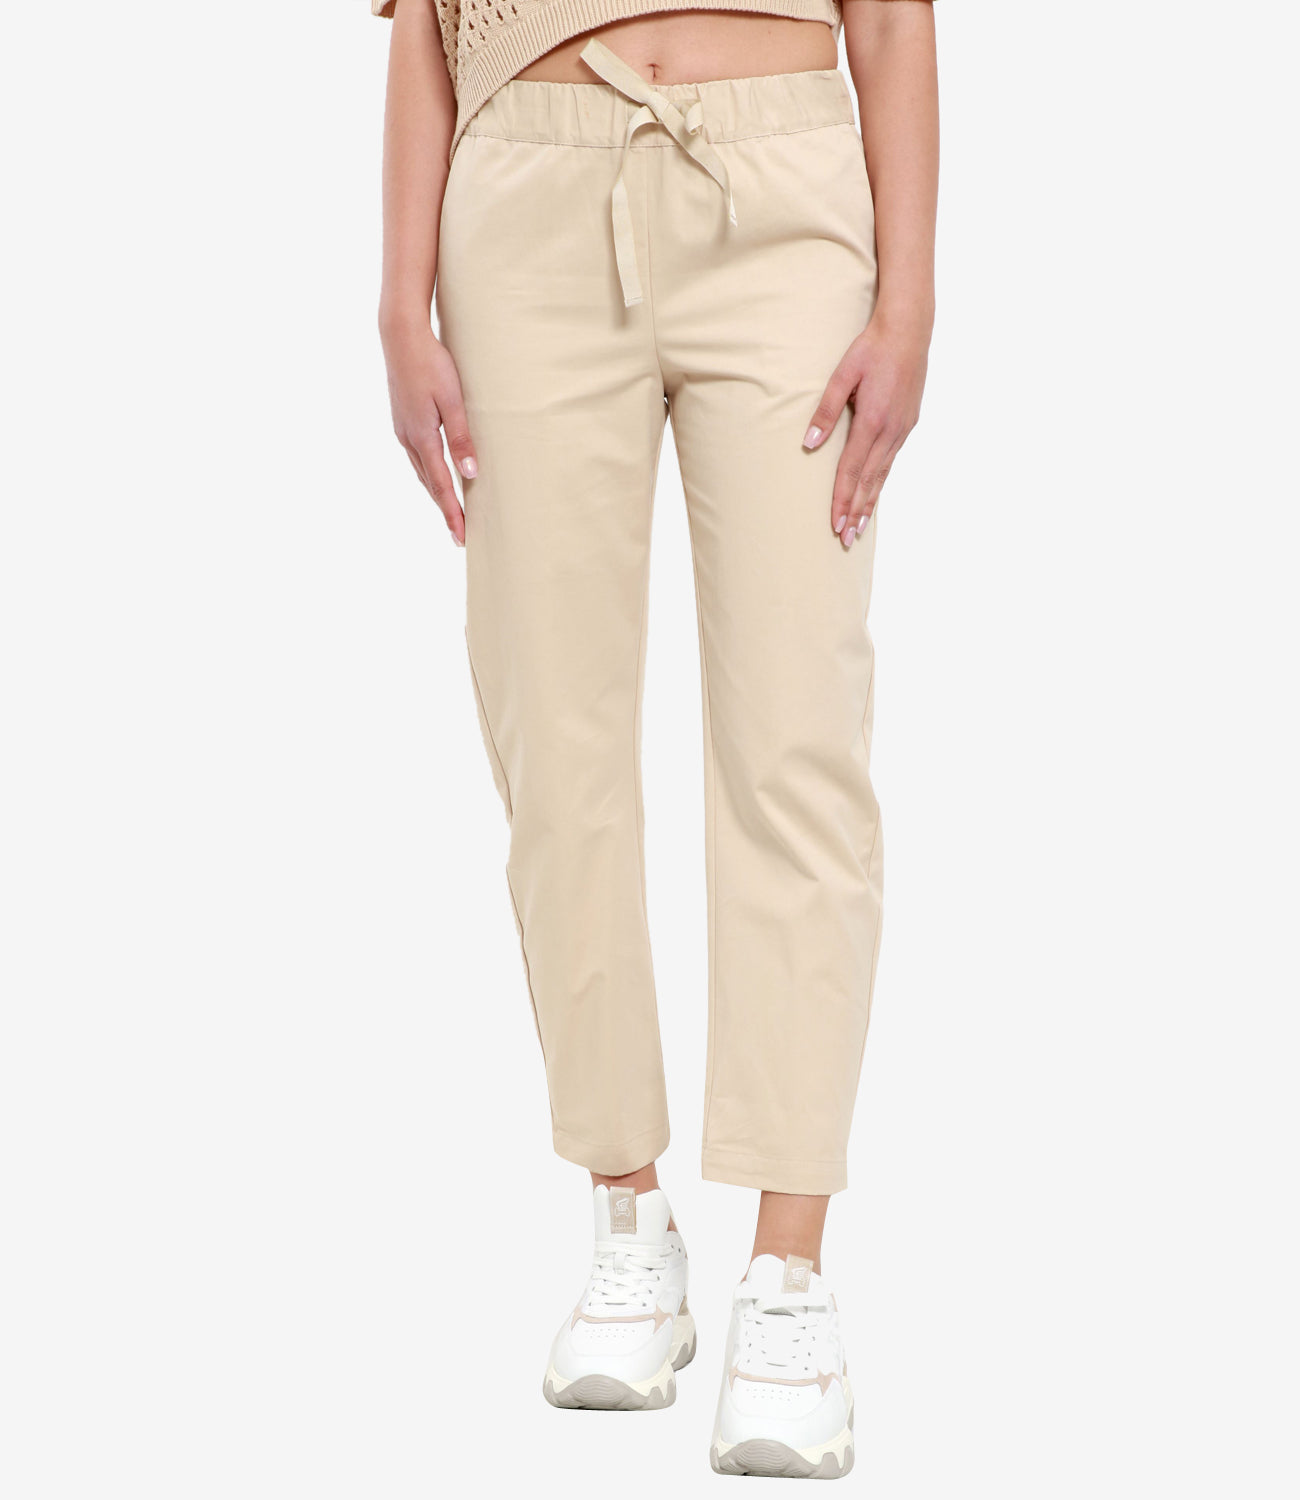 Semicouture | Light Camel Buddy Trousers